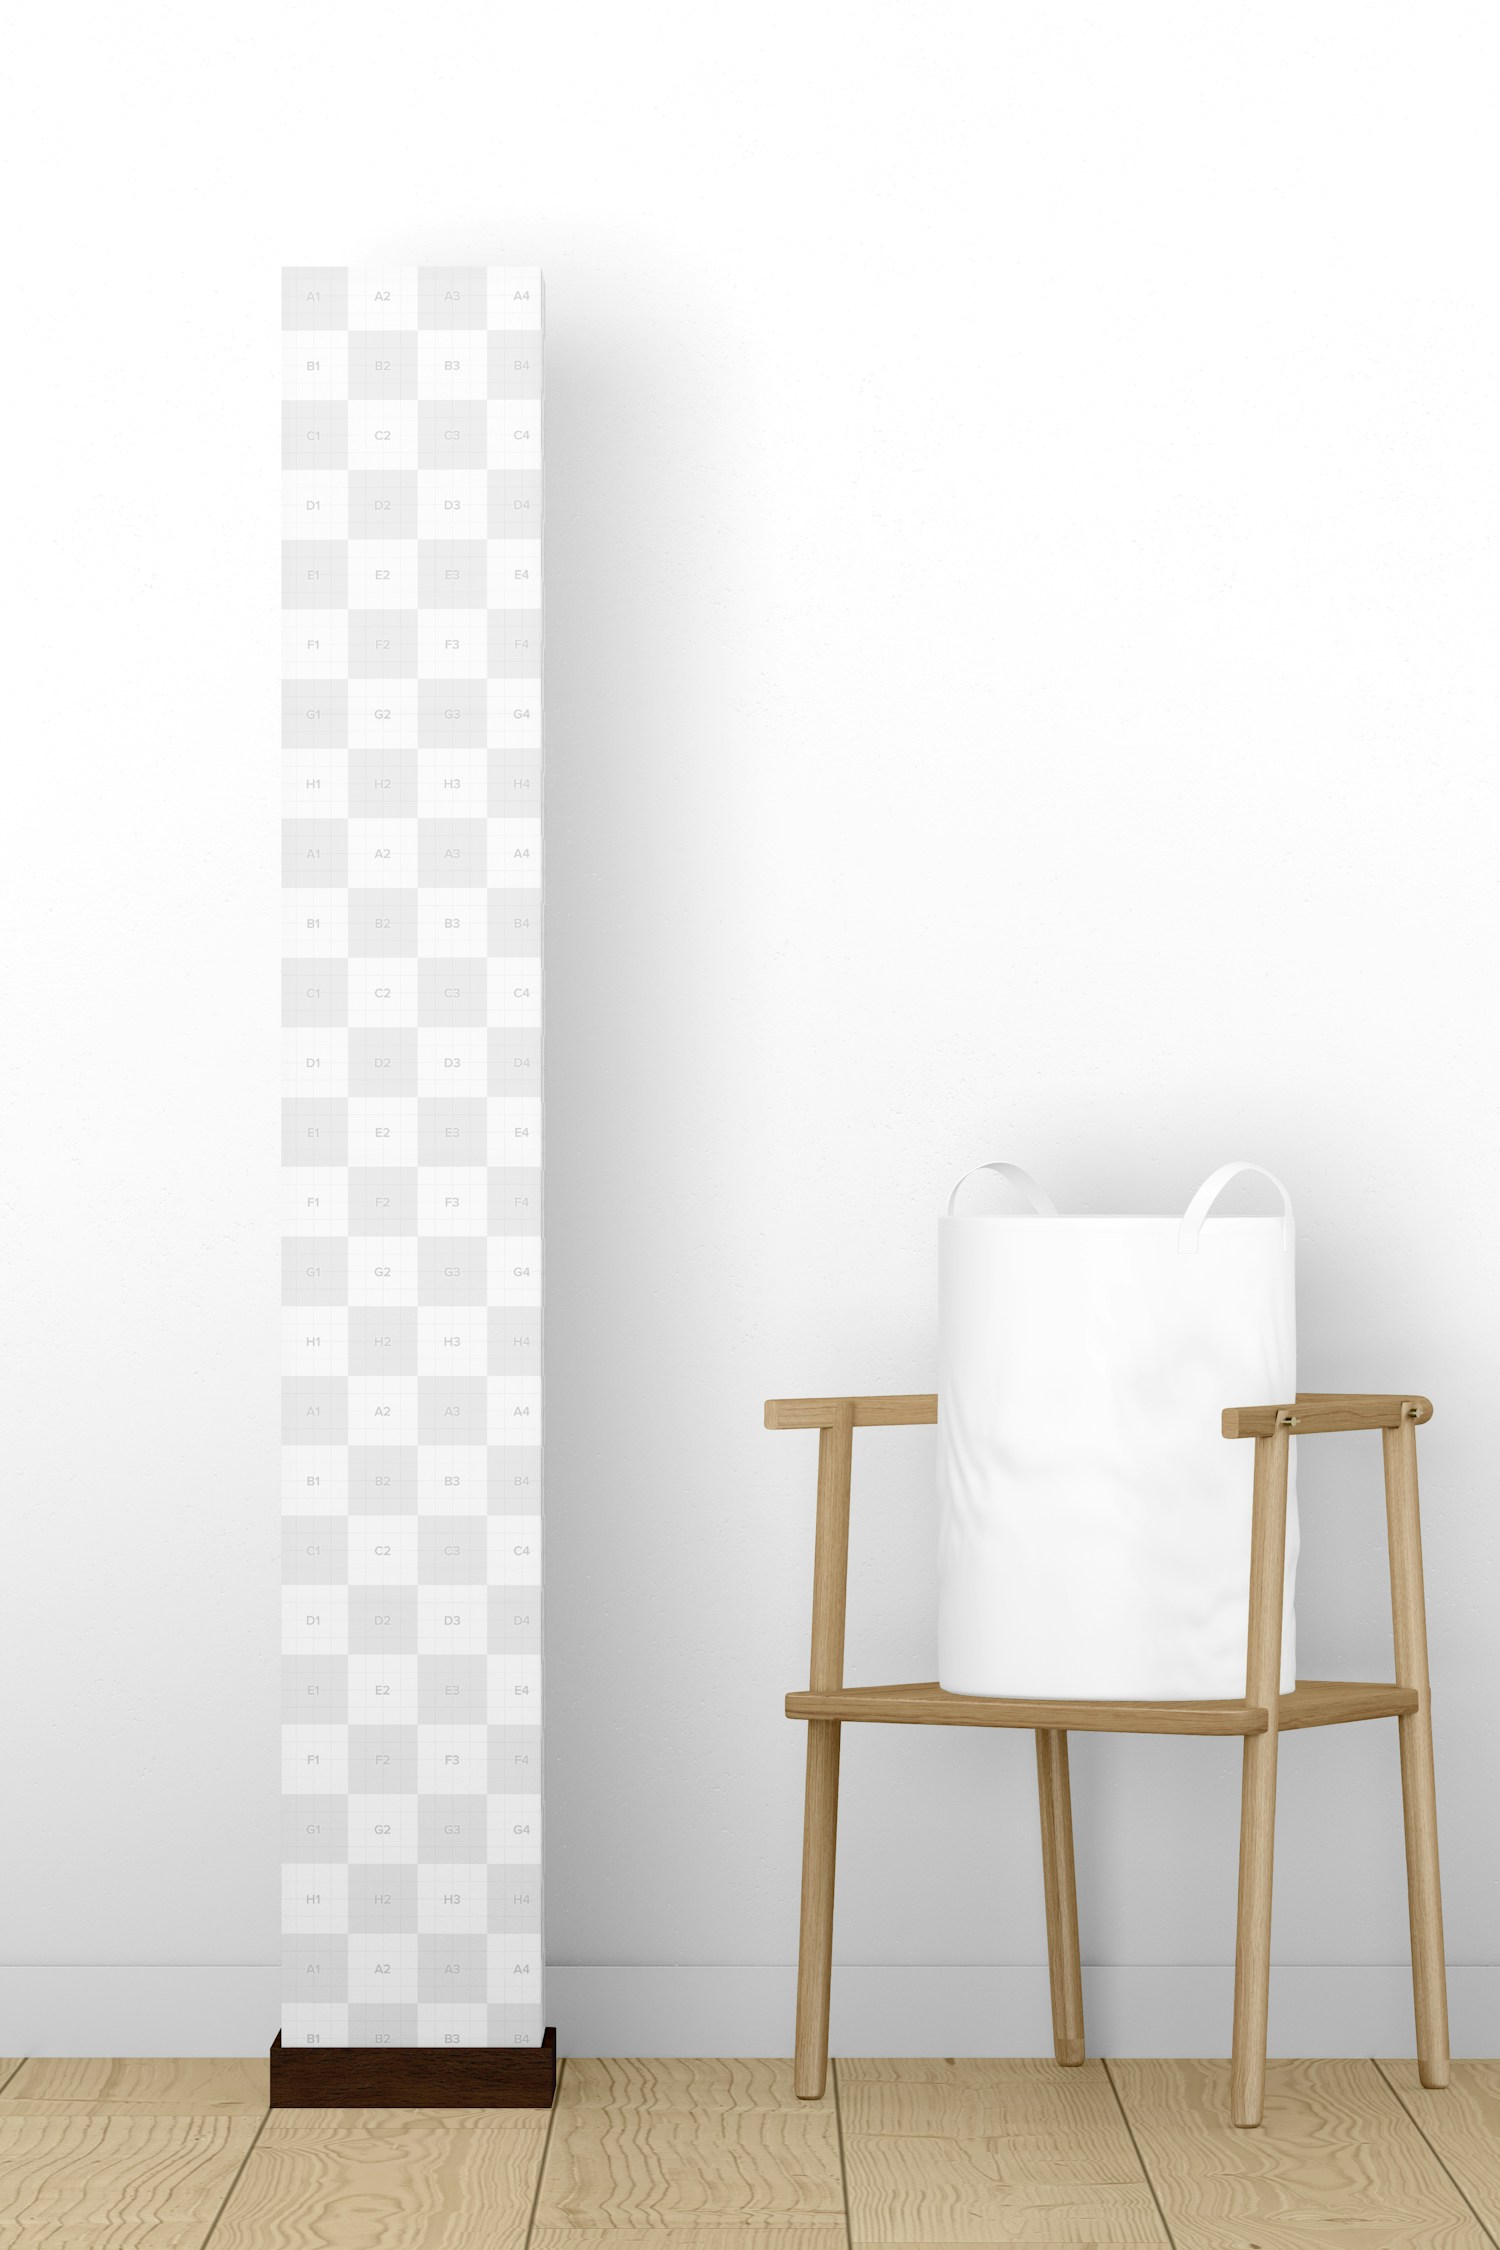 Paper Tower Lamp with Wooden Chair Mockup